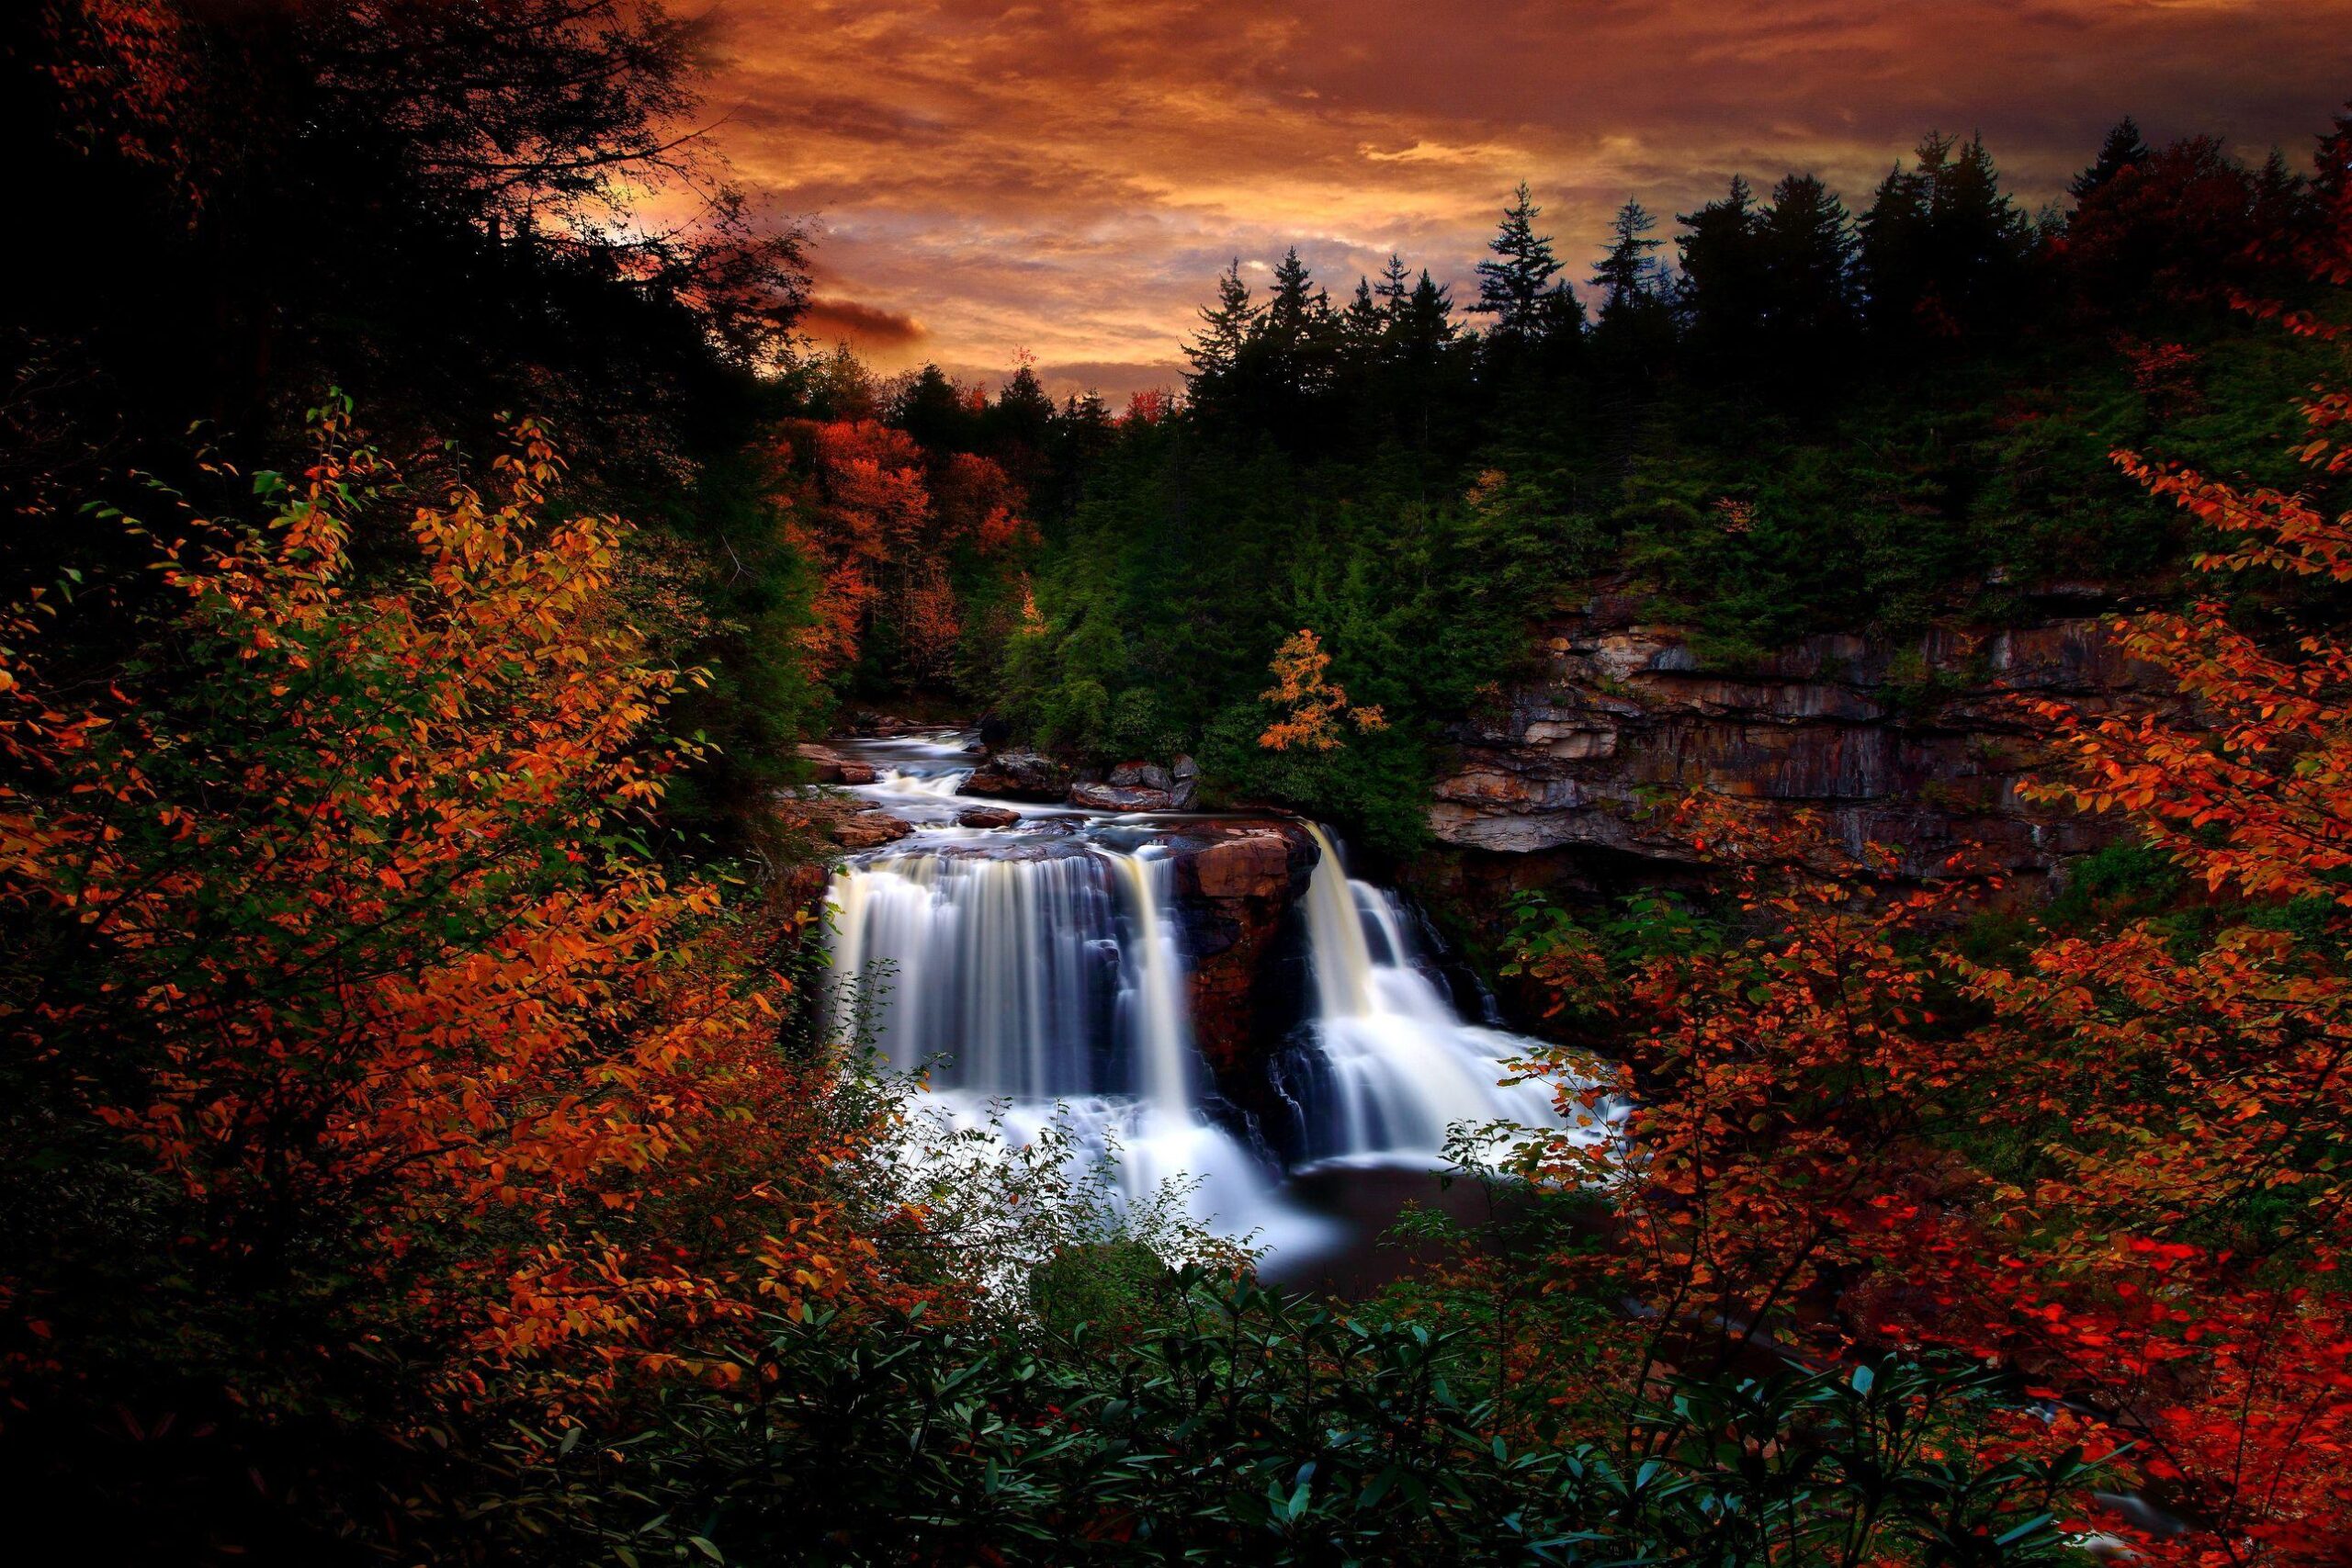 Autumn Waterfall at Blackwater Falls State Park, West Virginia by